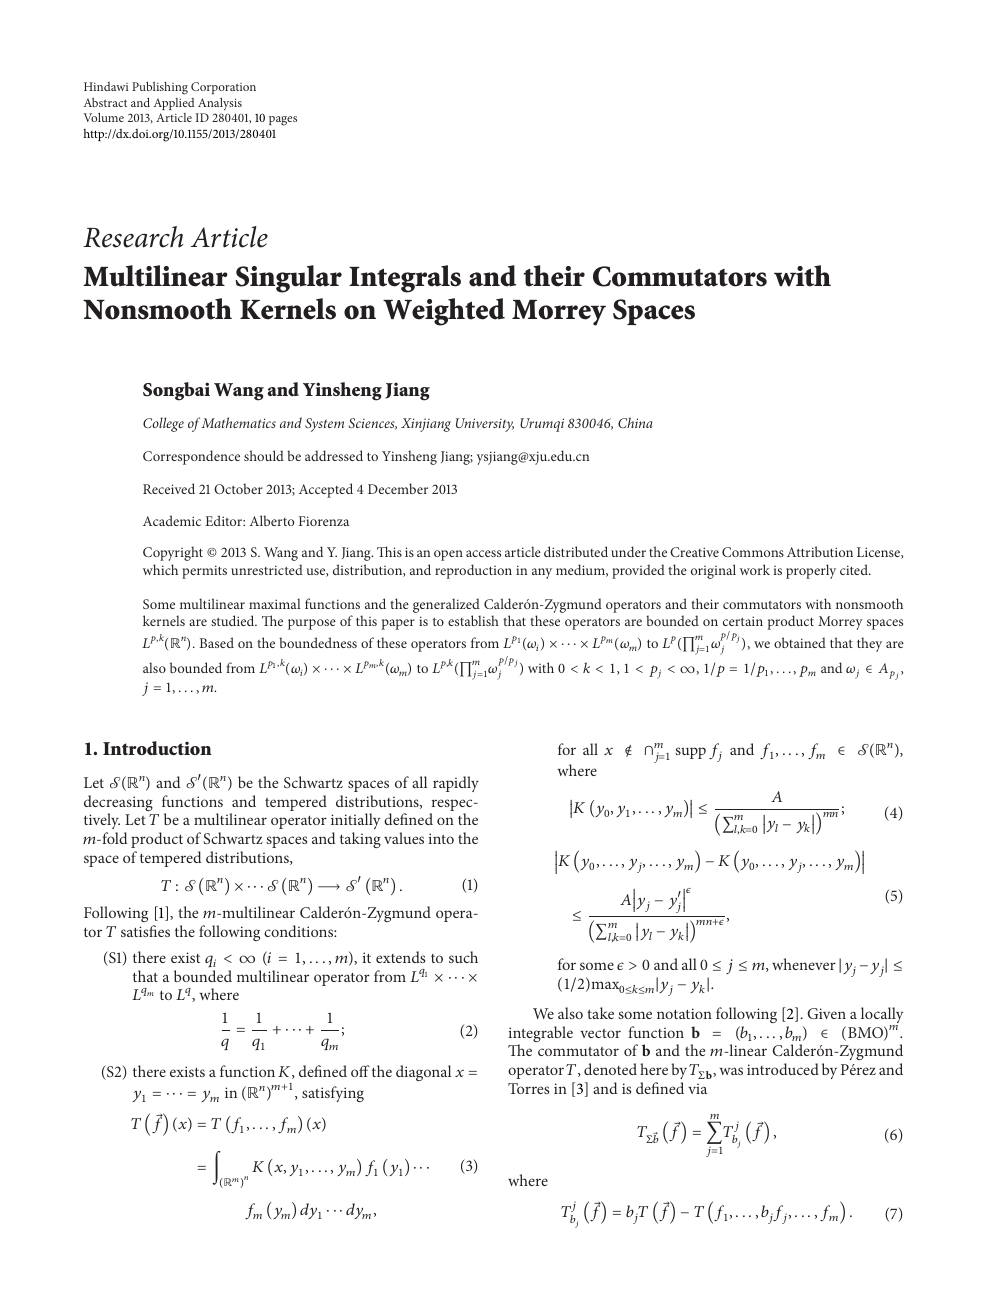 Multilinear Singular Integrals And Their Commutators With Nonsmooth Kernels On Weighted Morrey Spaces Topic Of Research Paper In Mathematics Download Scholarly Article Pdf And Read For Free On Cyberleninka Open Science